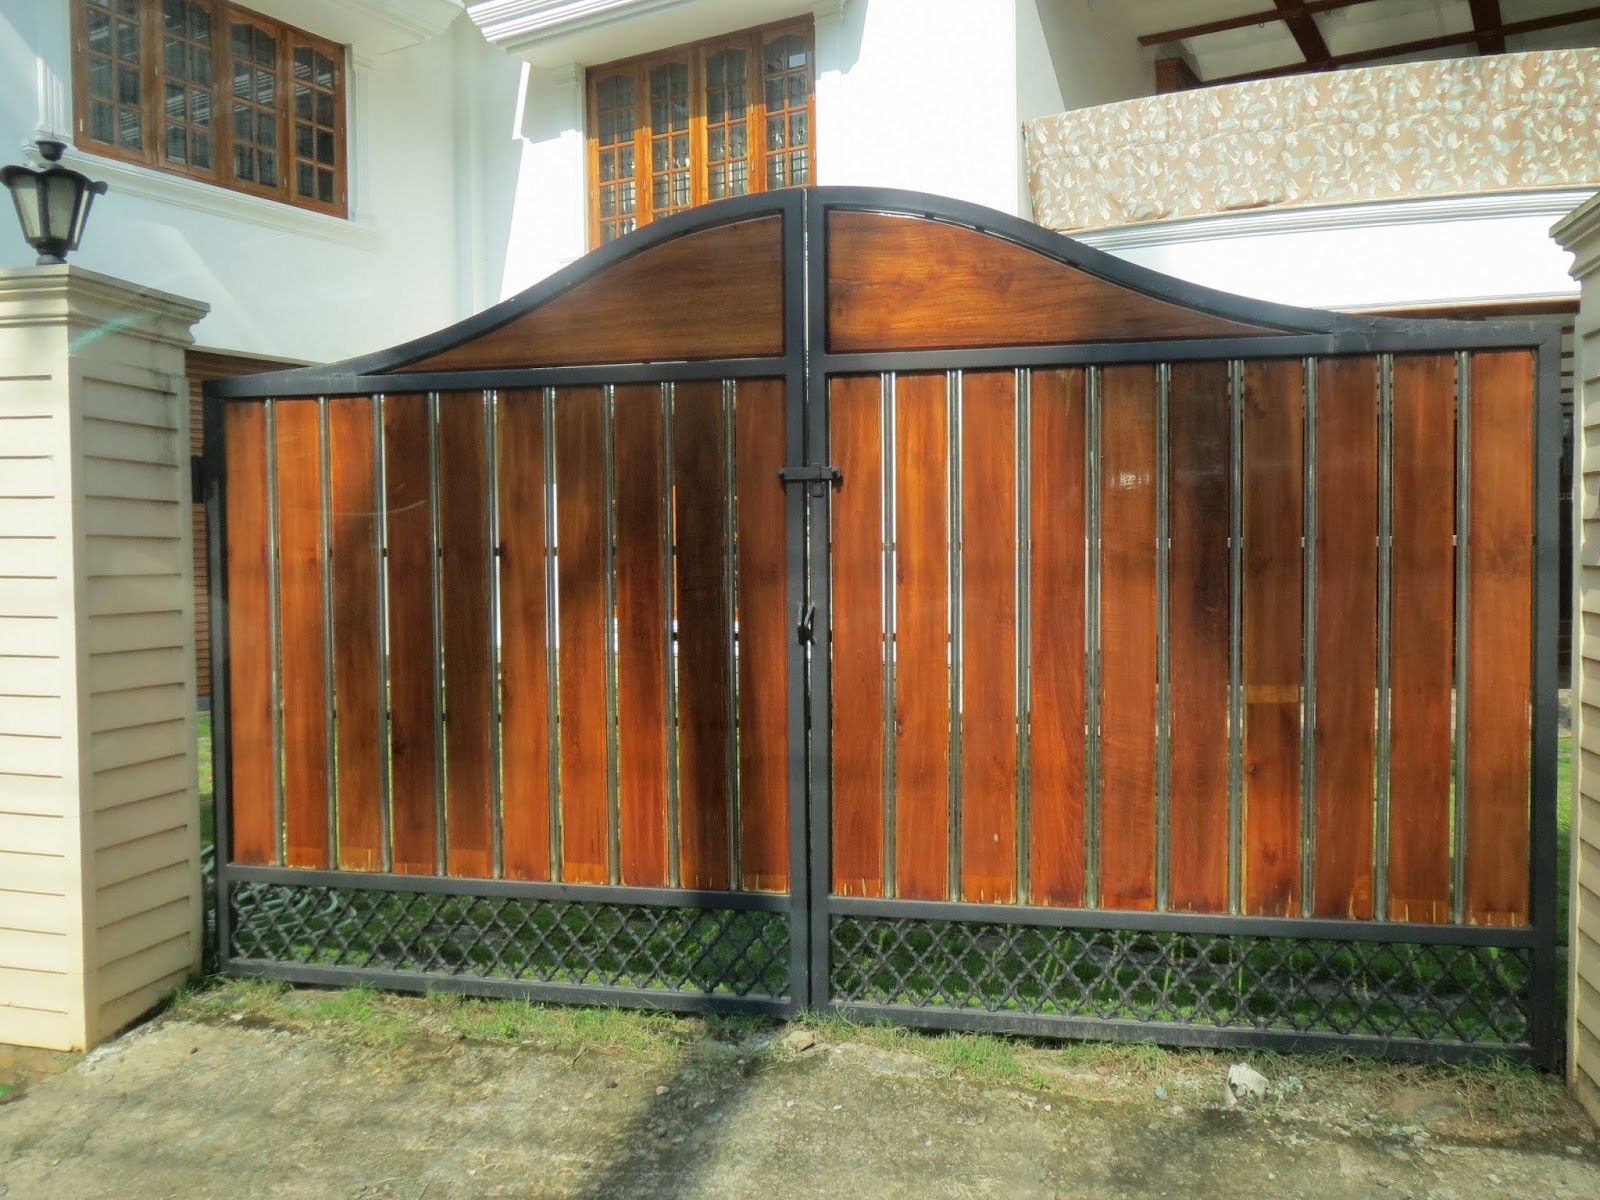 Kerala Gate Designs: Different types of gates in Kerala, India.